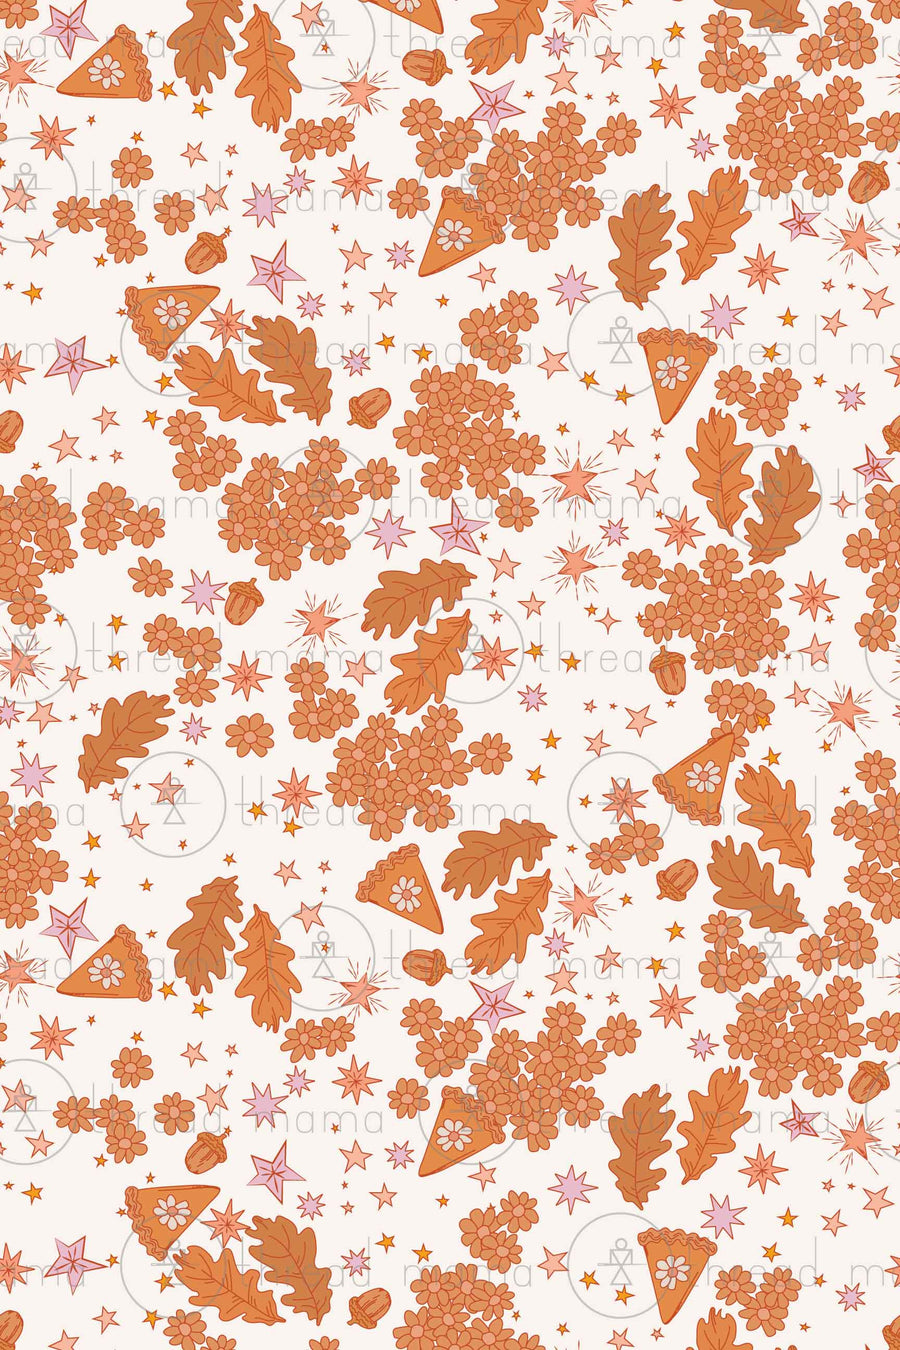 Repeating Pattern 148 (Seamless)